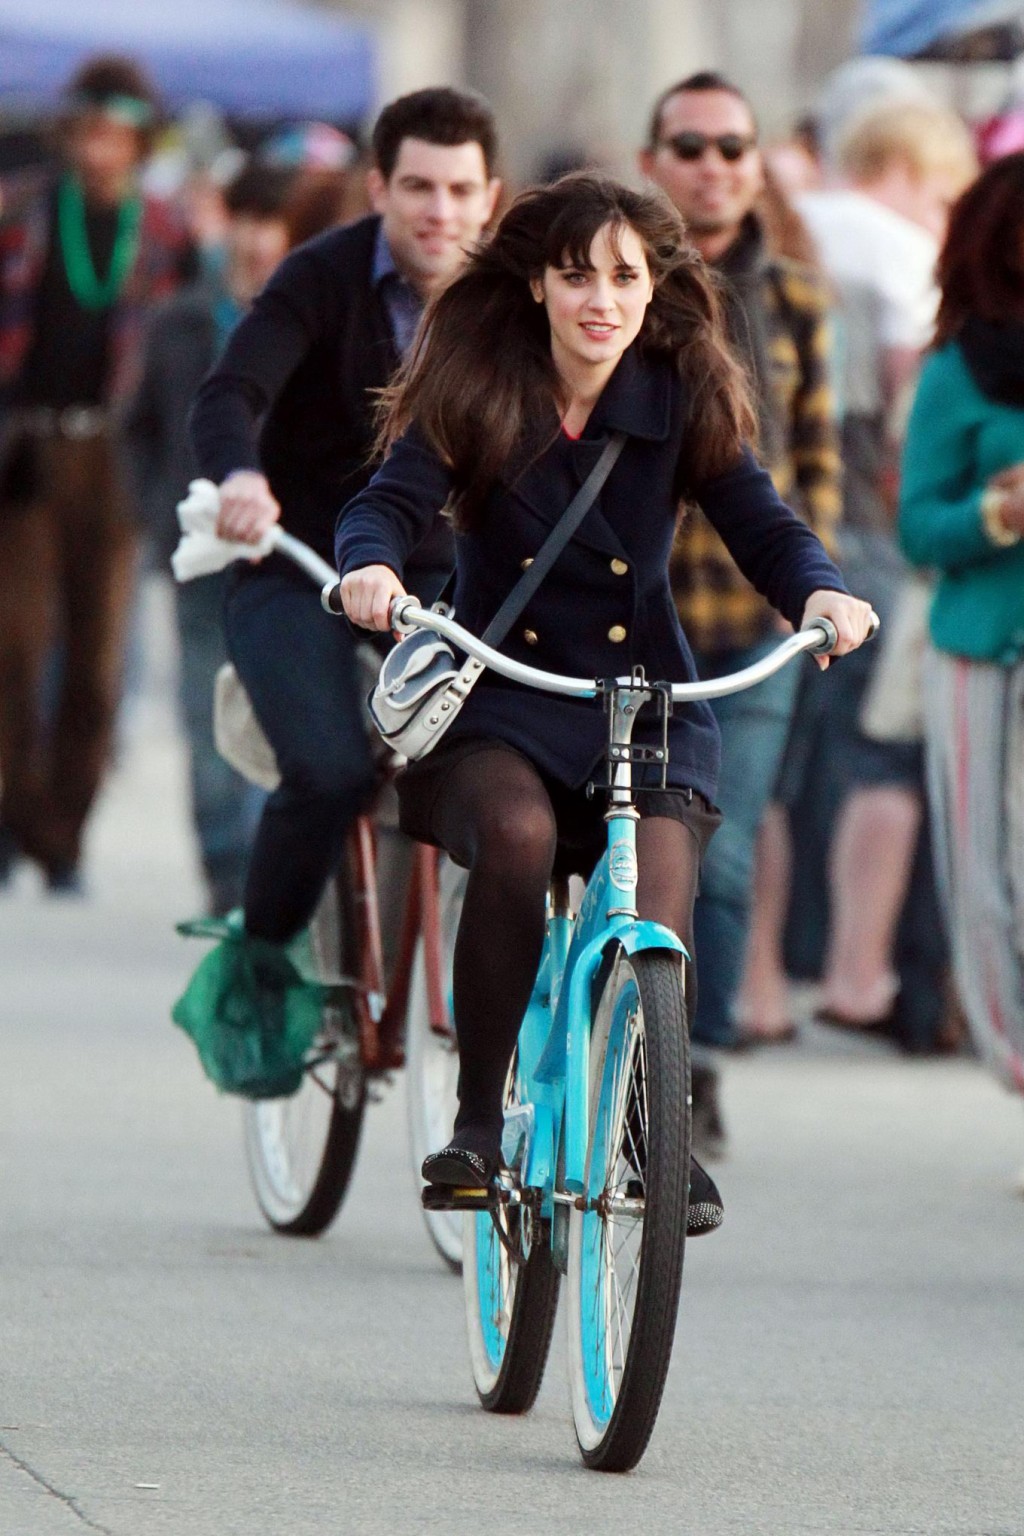 Zooey Deschanel upskirt while cycling in mini skirt  pantyhose on the 'New Girl' #75278290